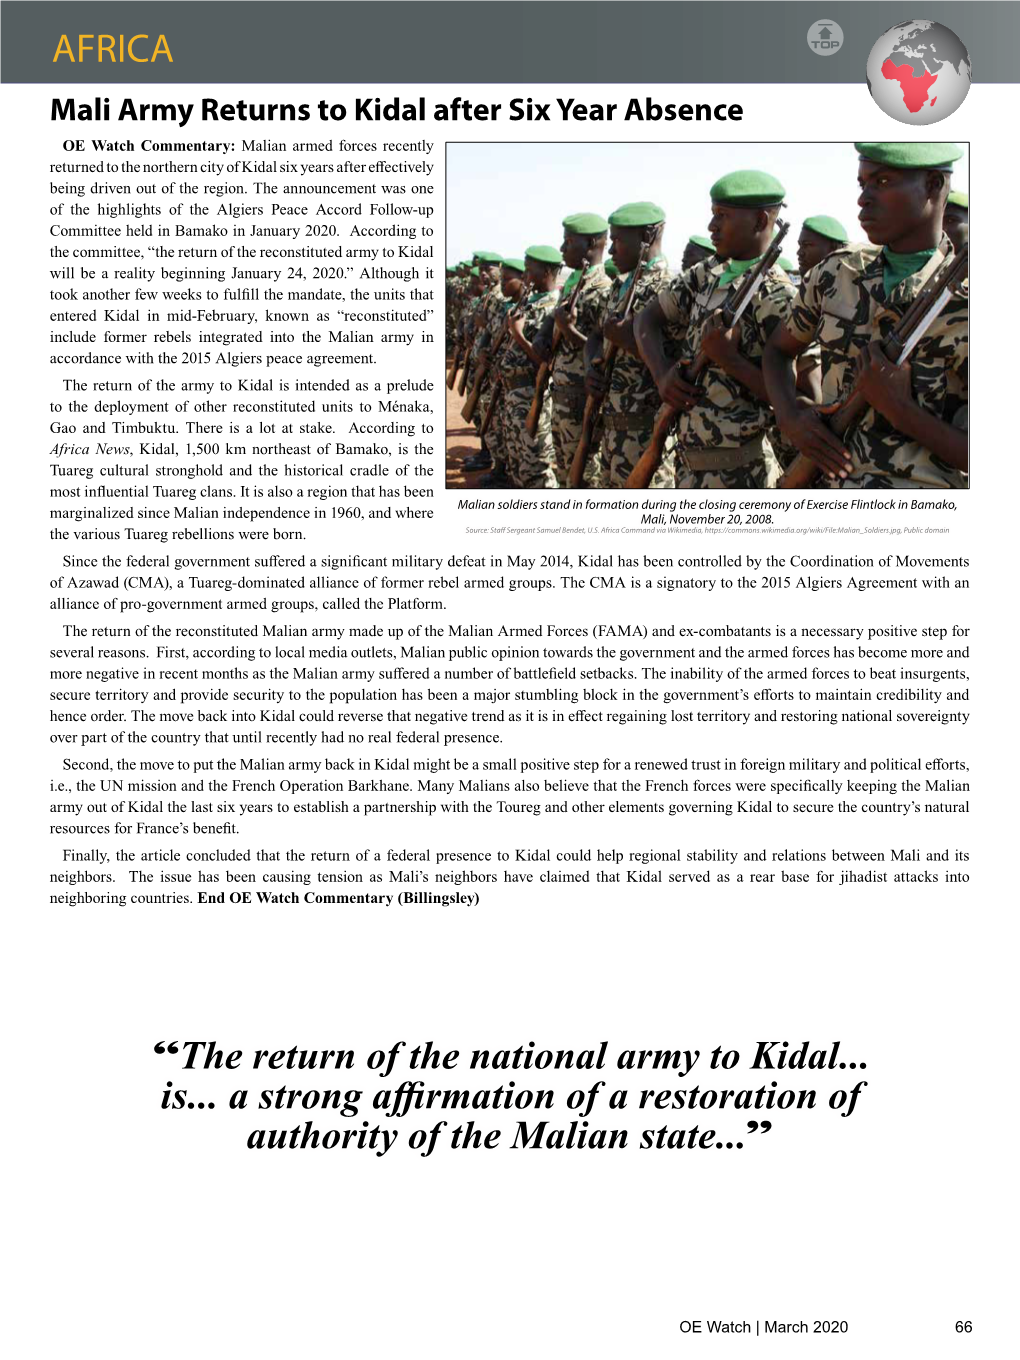 AFRICA “The Return of the National Army to Kidal... Is... a Strong